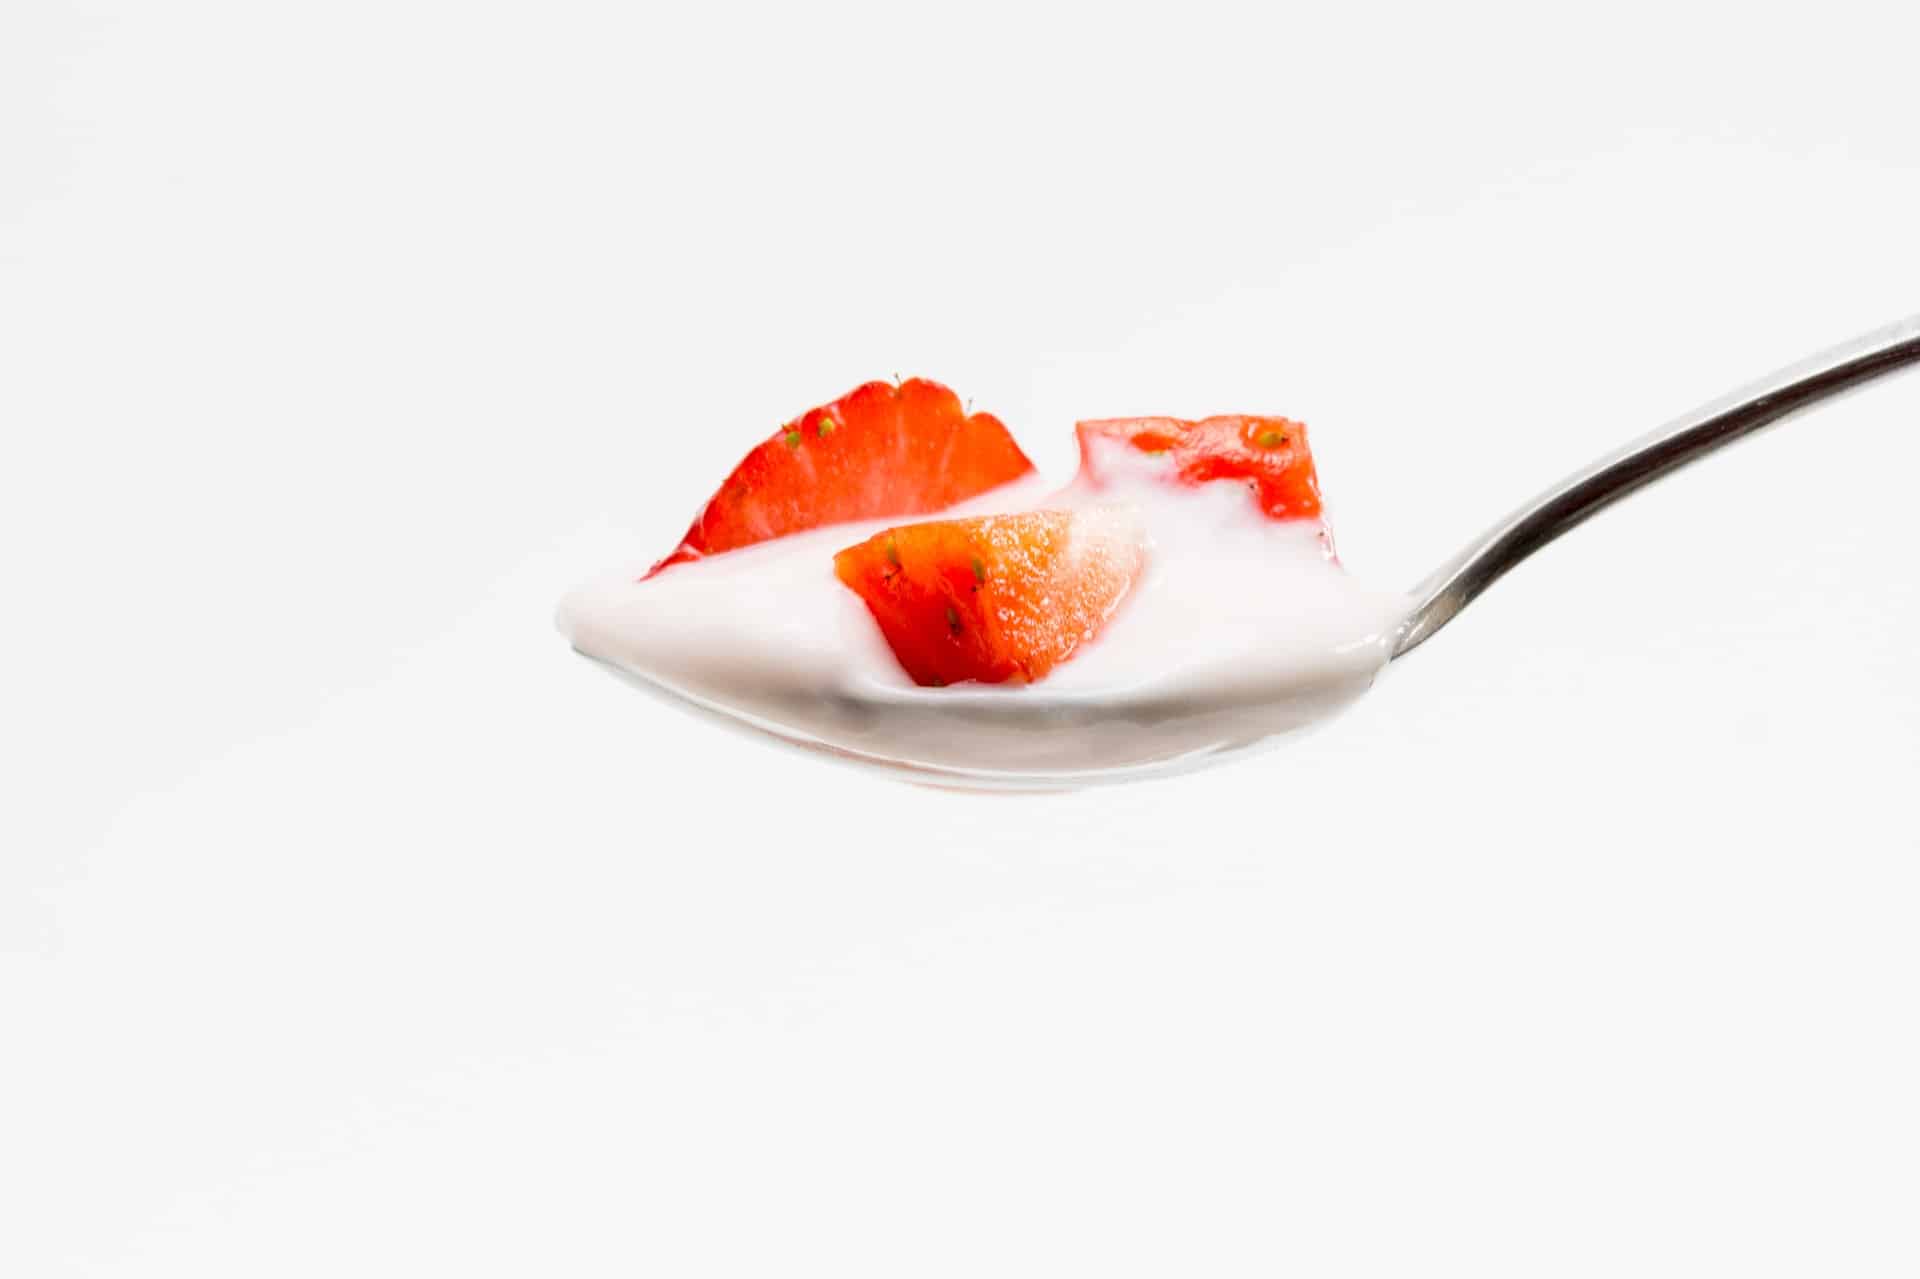 A spoonful of yogurt topped with sliced strawberries.